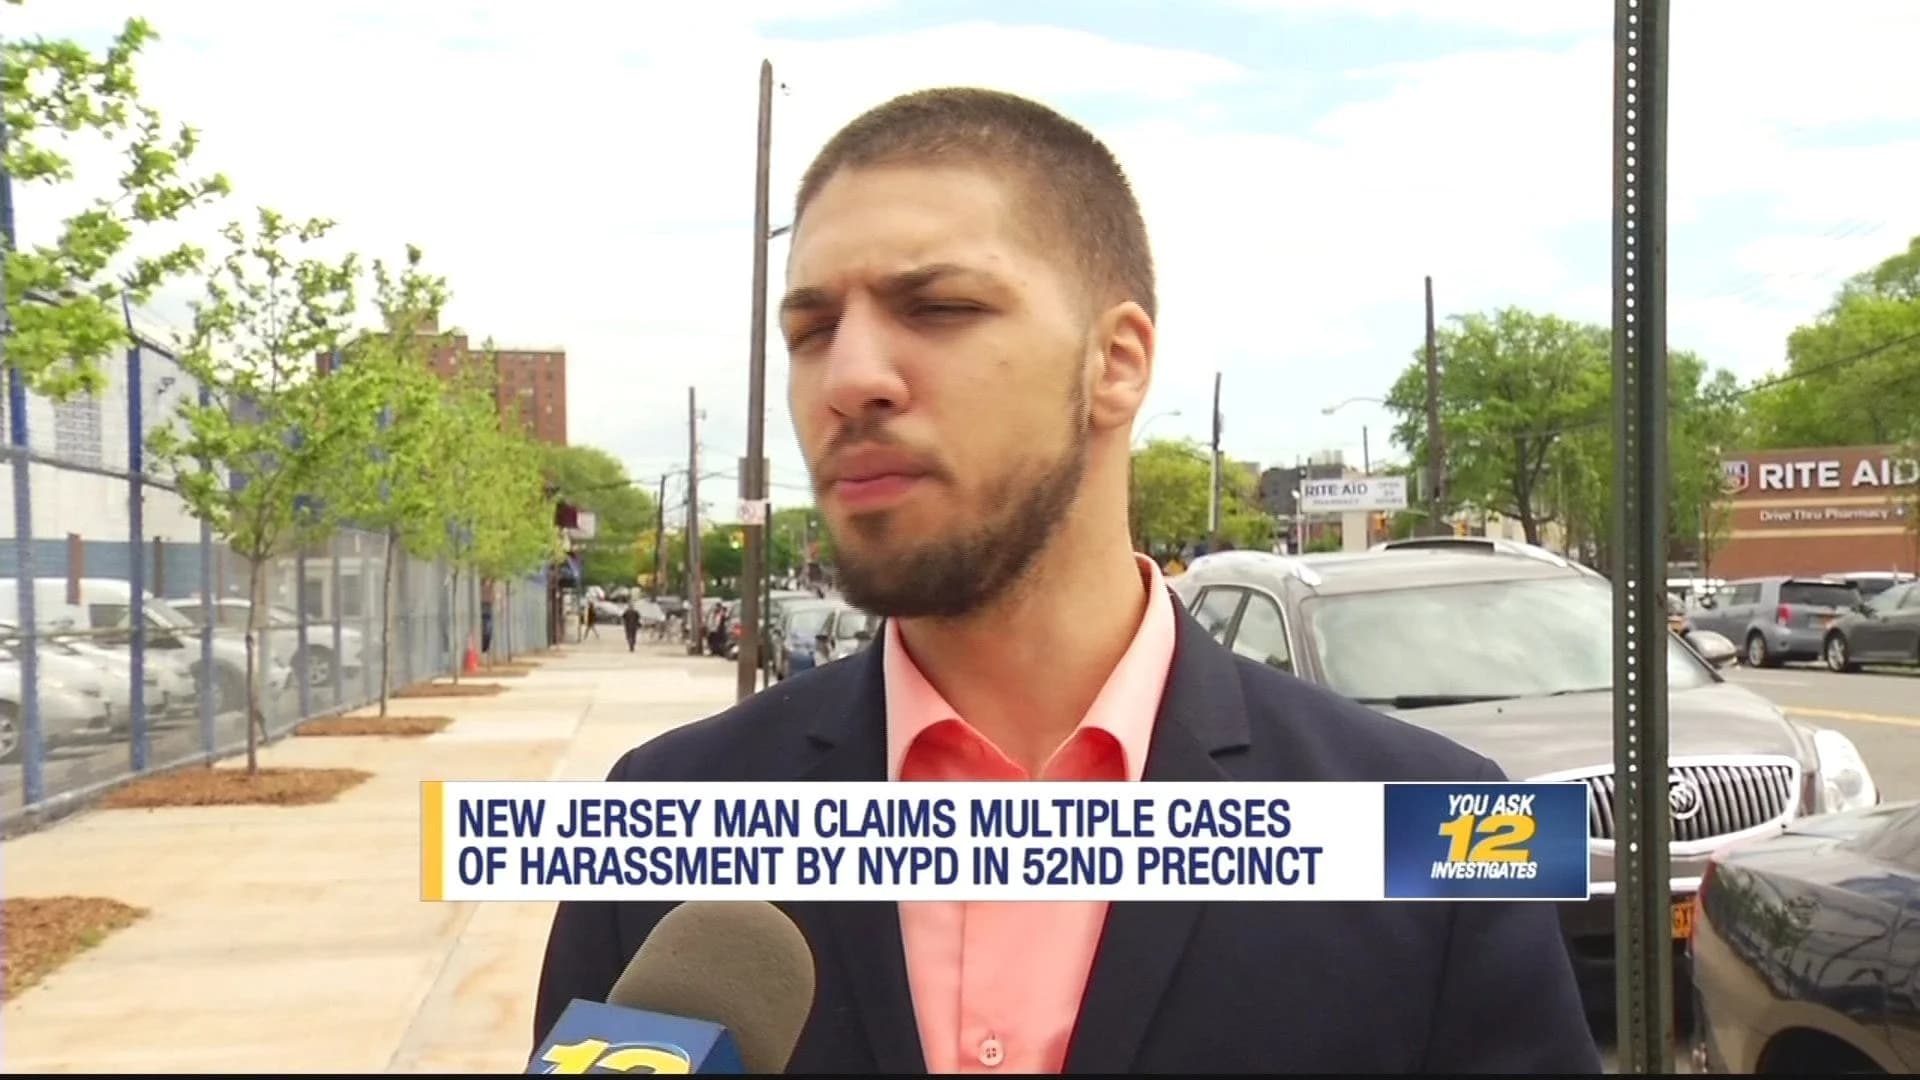 New Jersey man Ramon Rodriguez accuses NYPD of harassing him